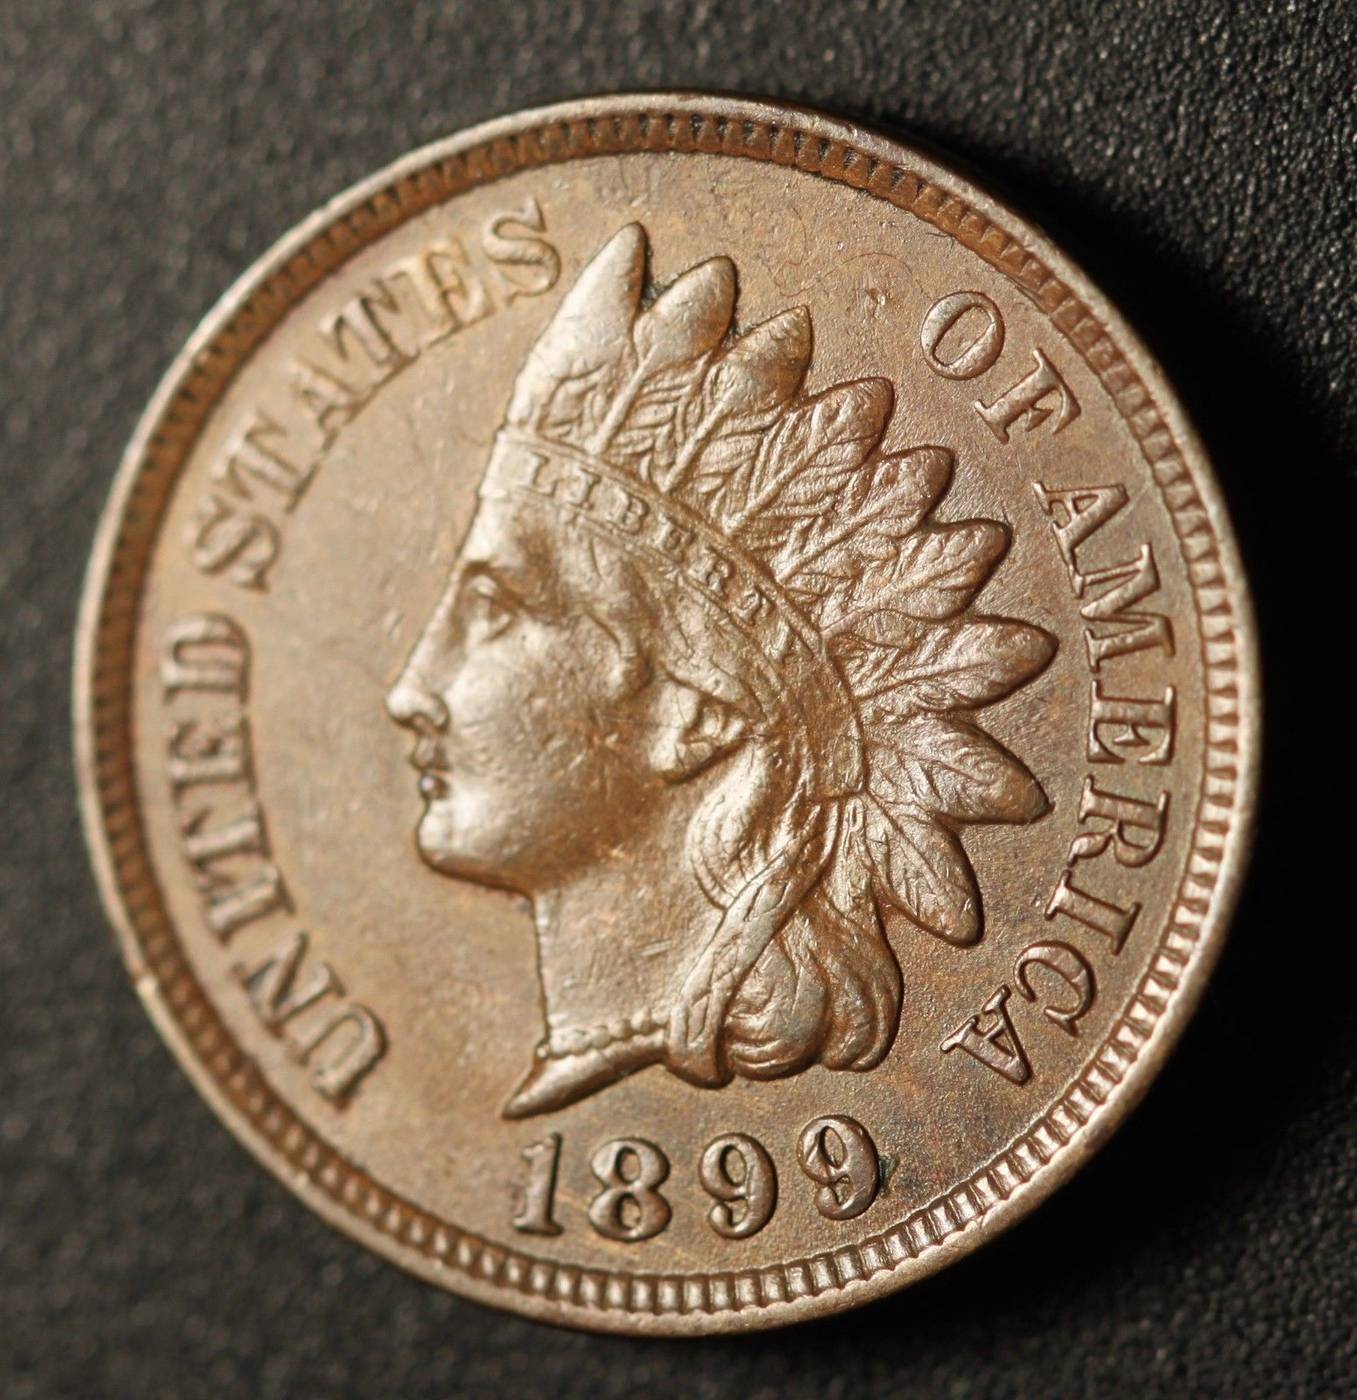 1899 RPD-019 - Indian Head Penny - Photo by Ed Nathanson